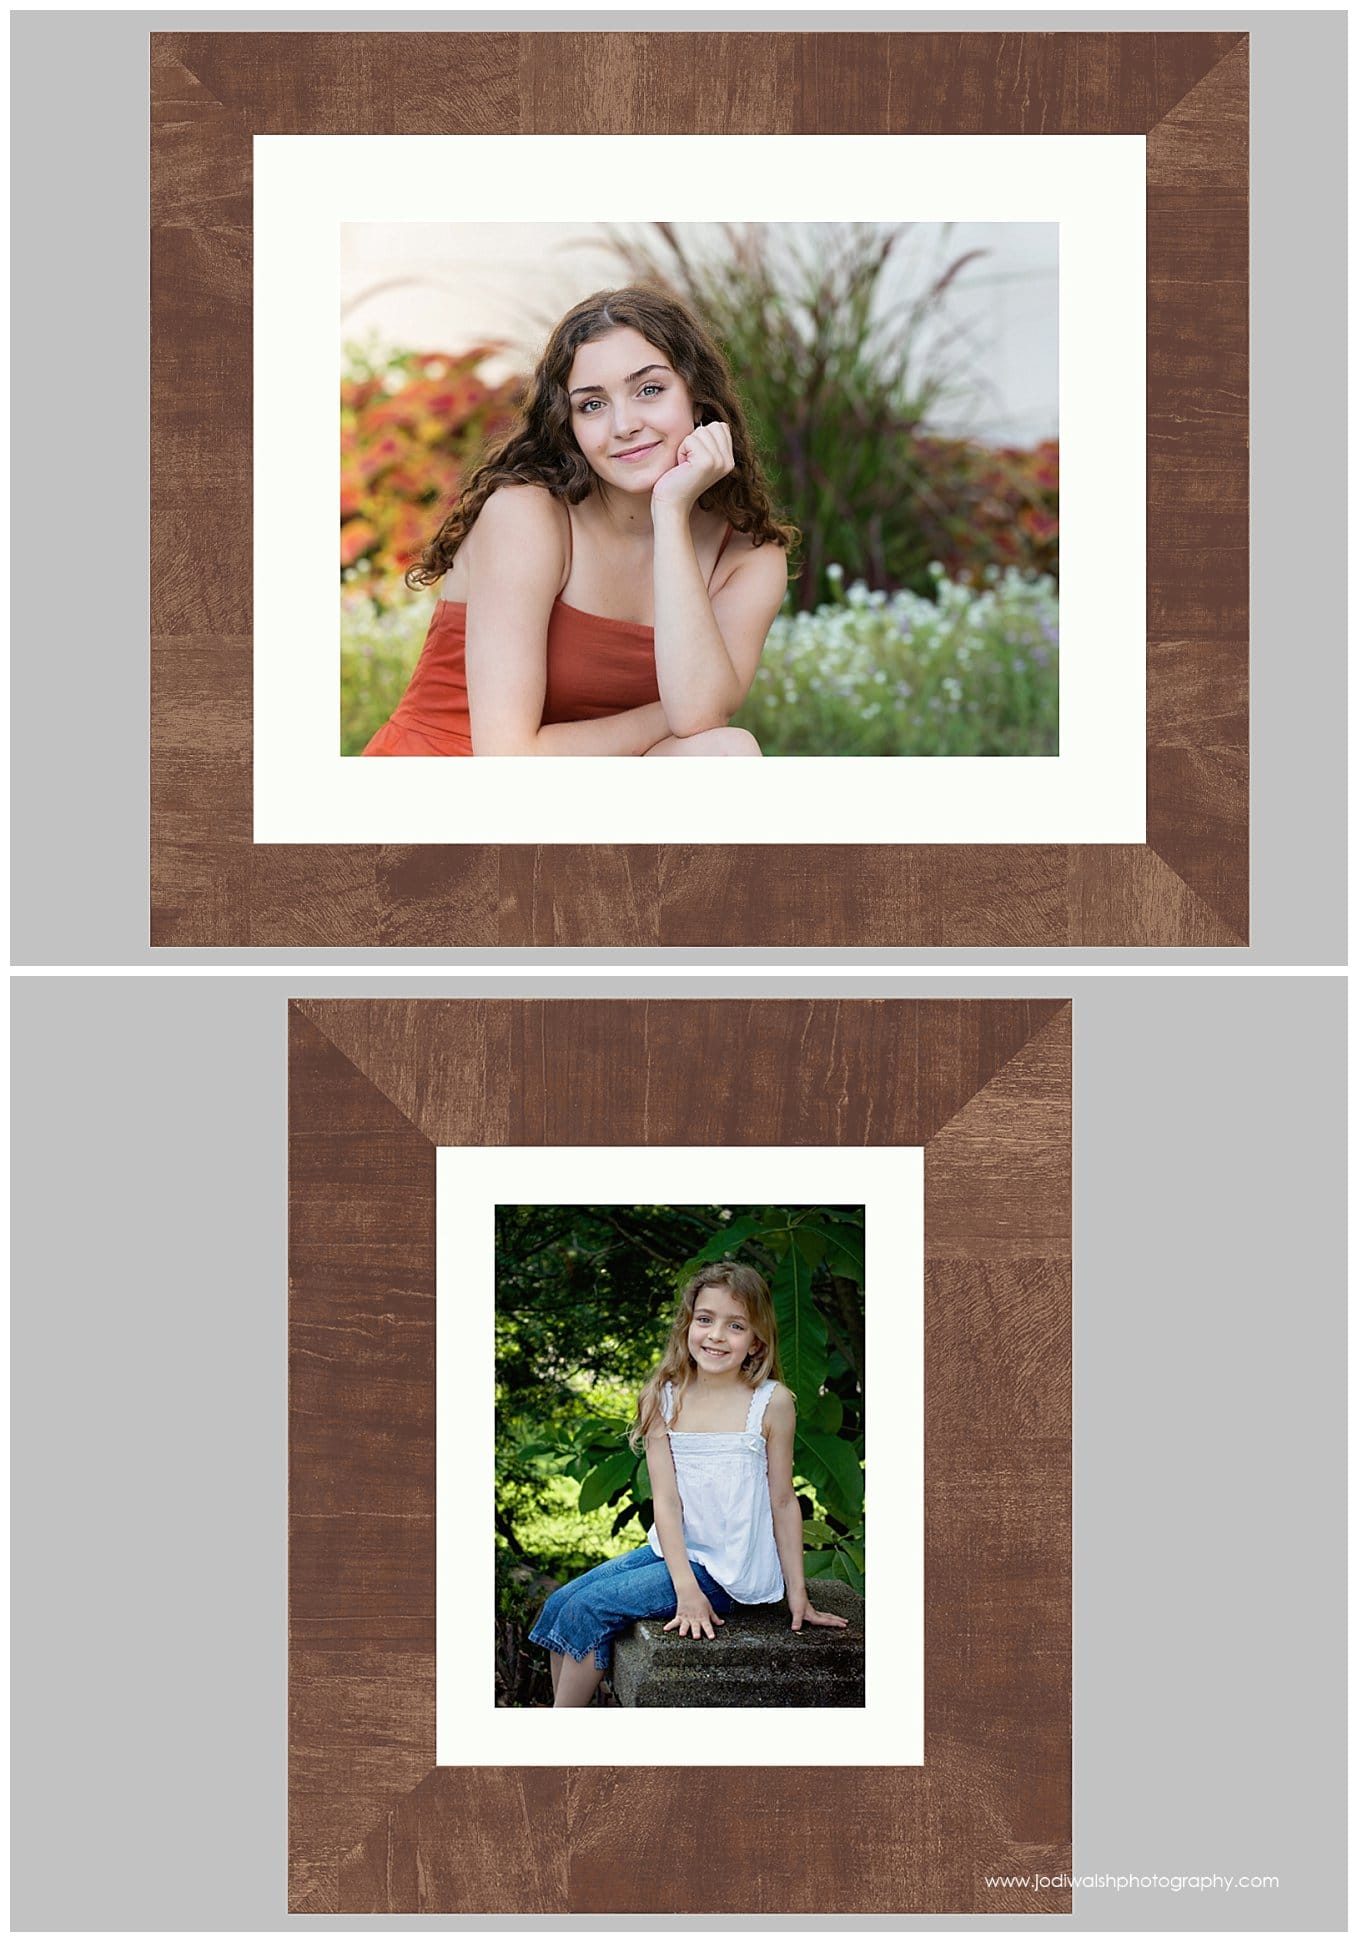 image of two framed photographs.  one is a senior girl sitting in a garden, resting her chin in her hand and her elbow on her knee.  The second image is the senior girl as a little girl.  She's wearing a white shirt and is sitting on a garden wall.